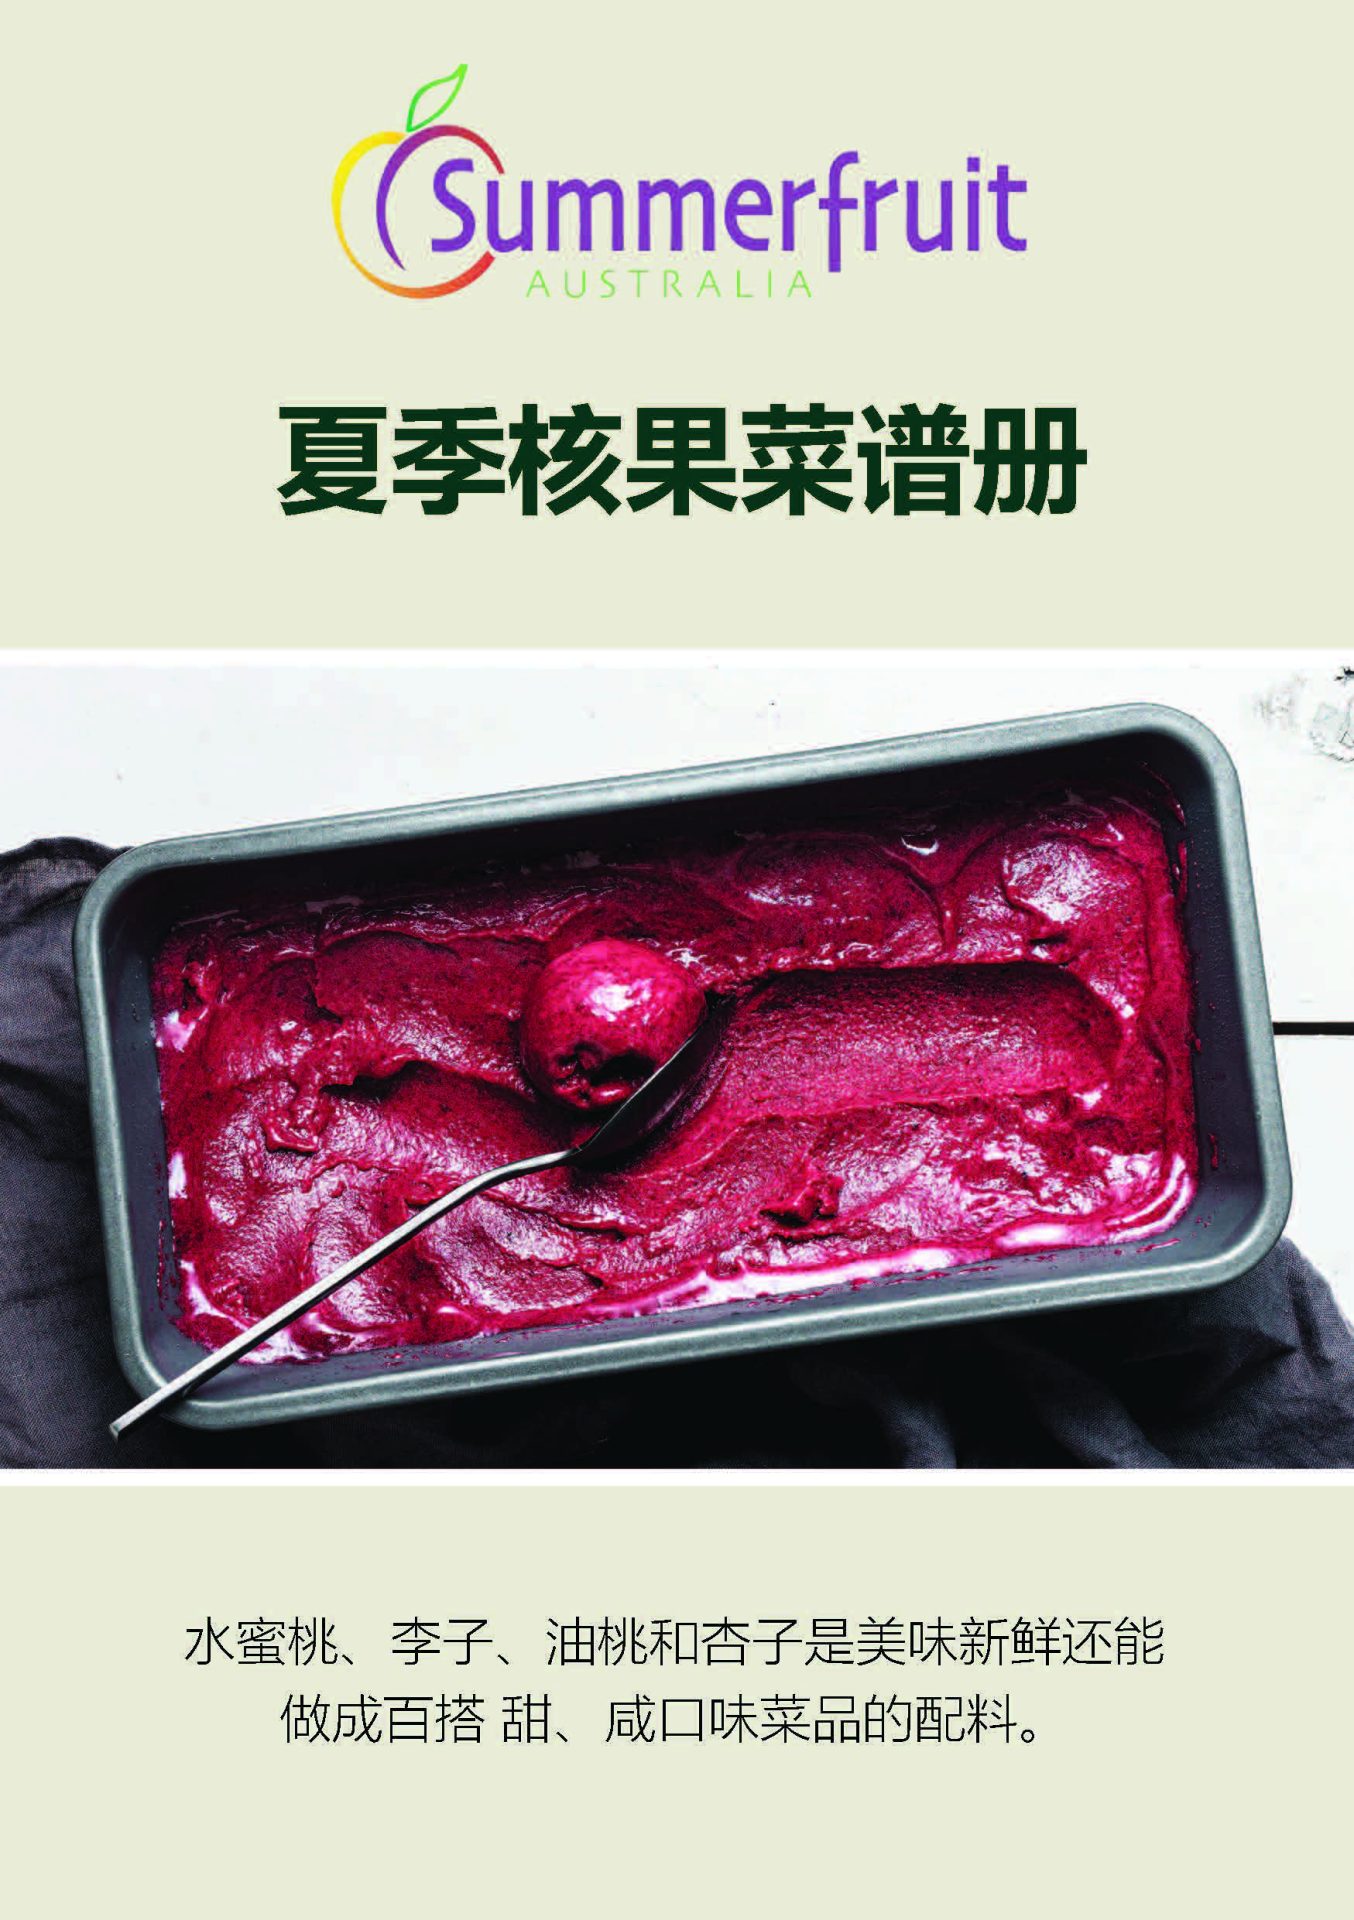 Front cover of summerfruit recipe booklet